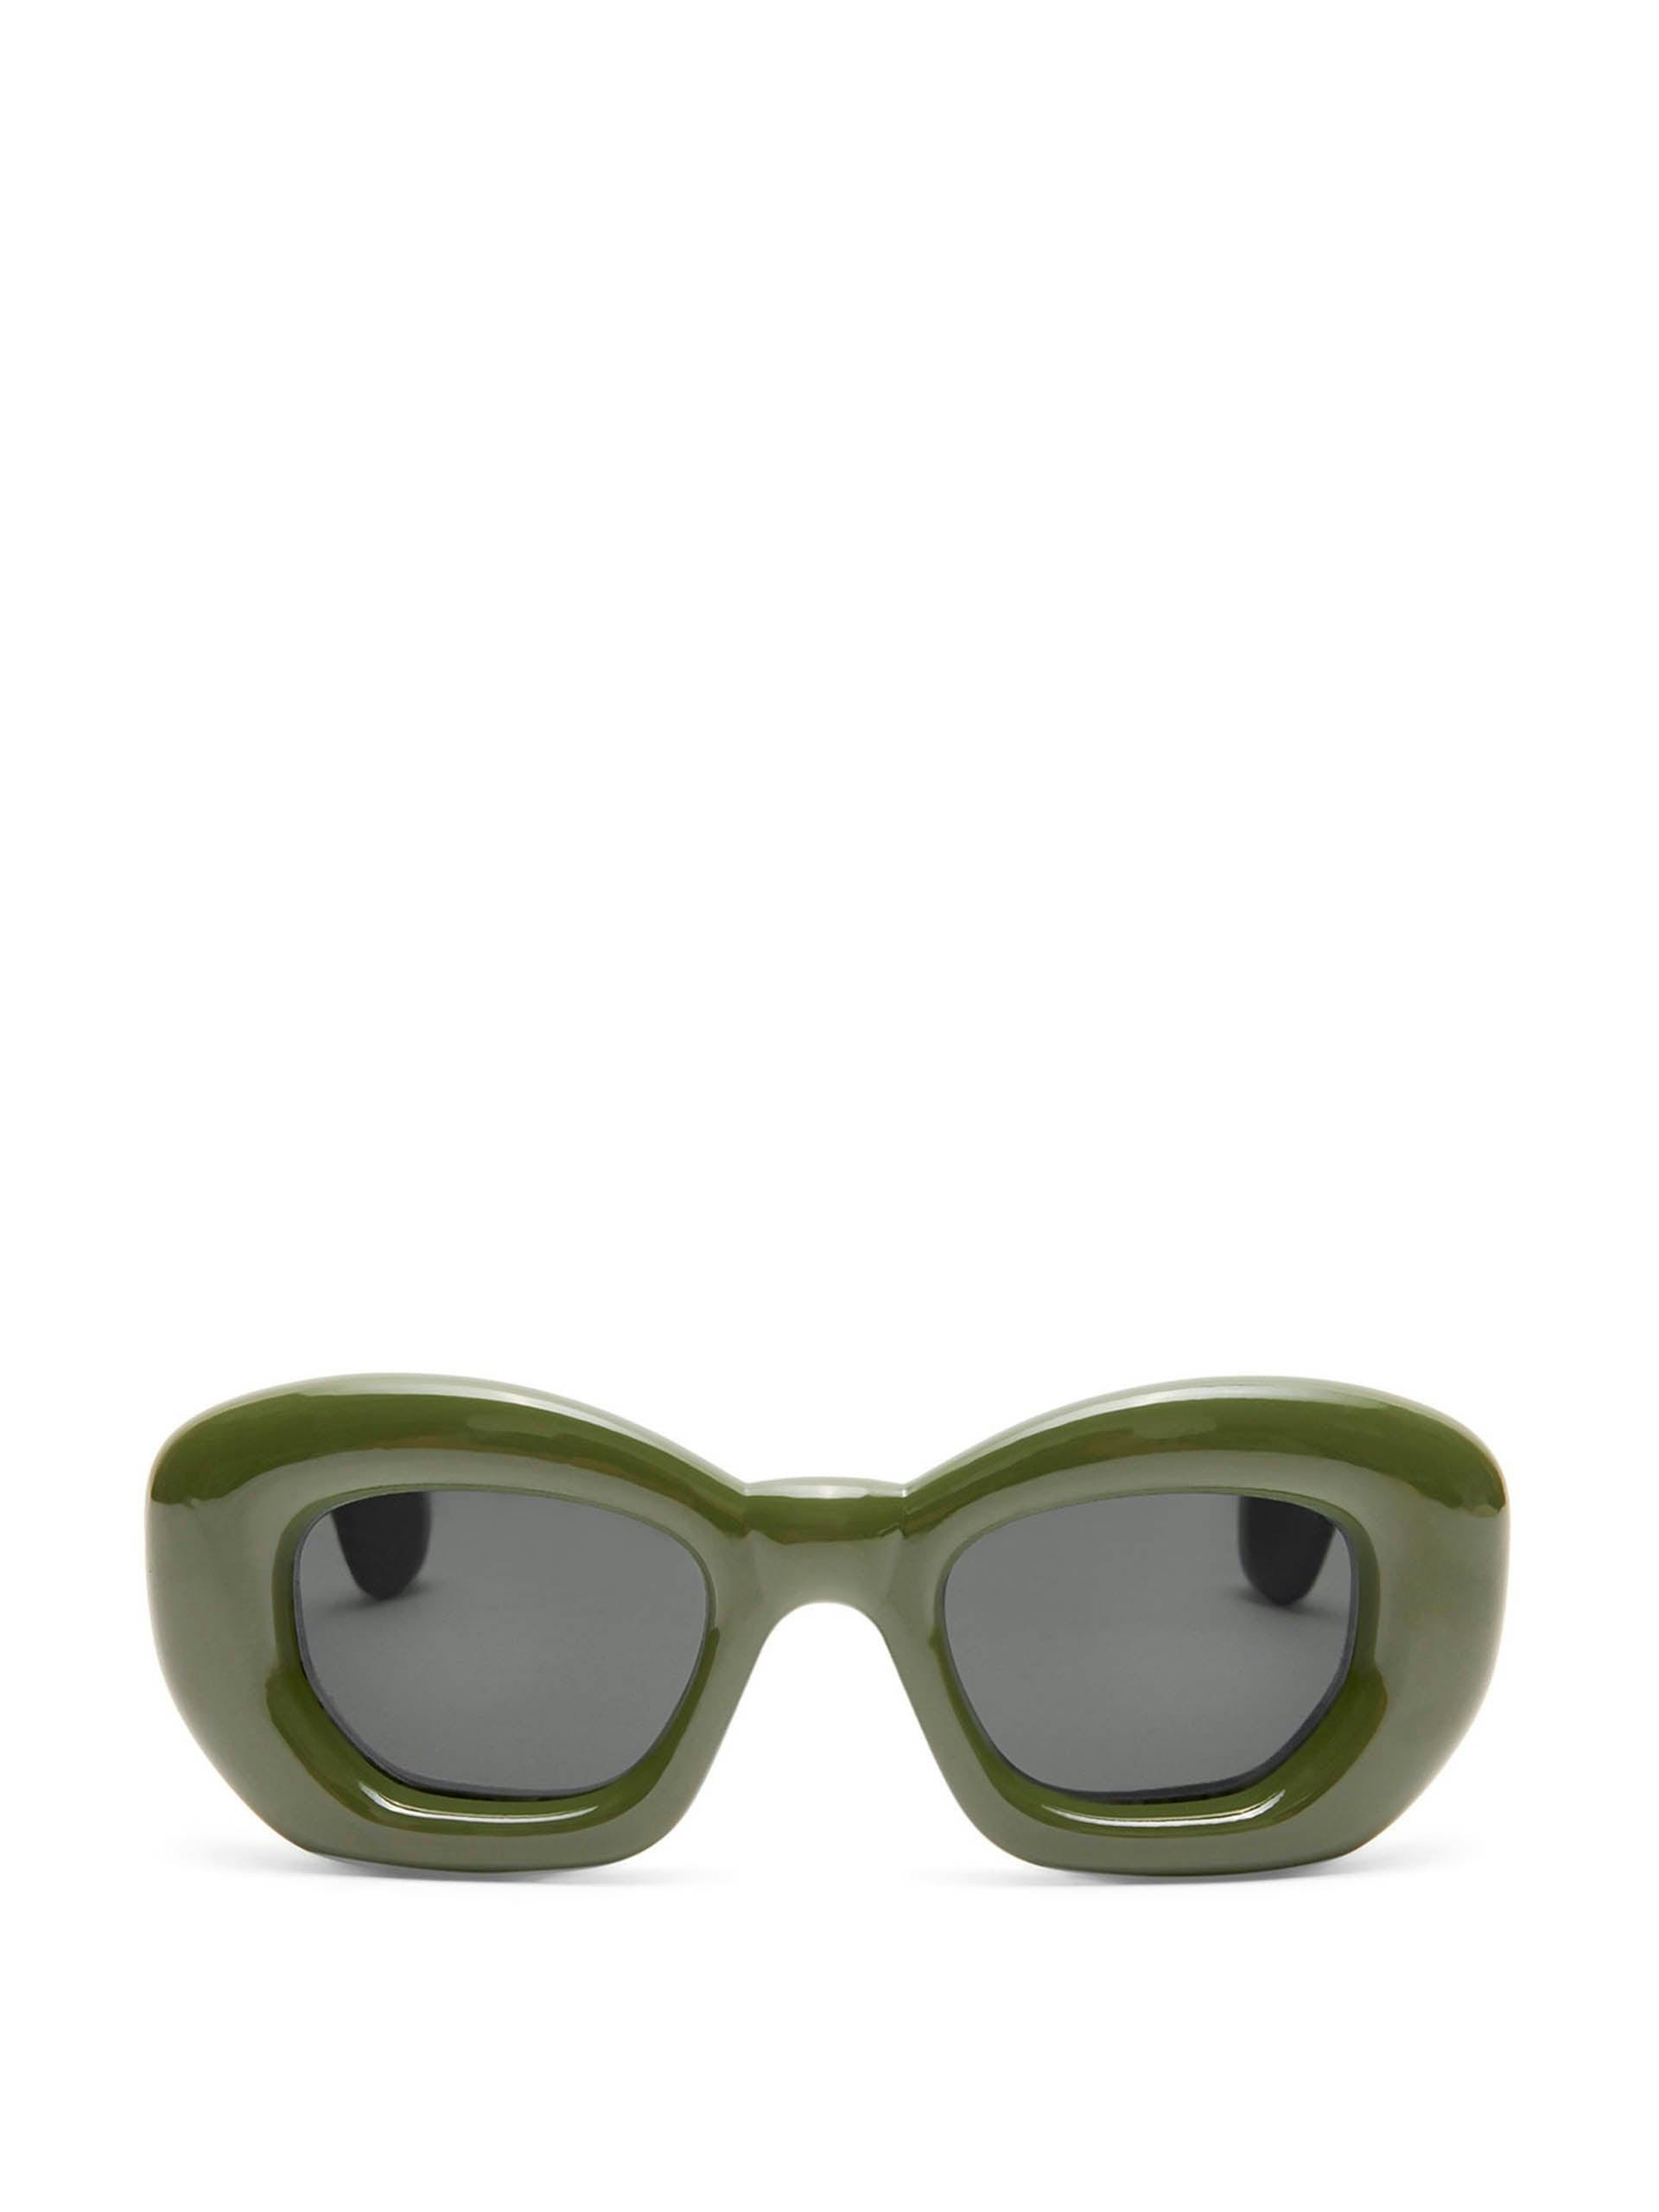 Inflated butterfly sunglasses in dark green